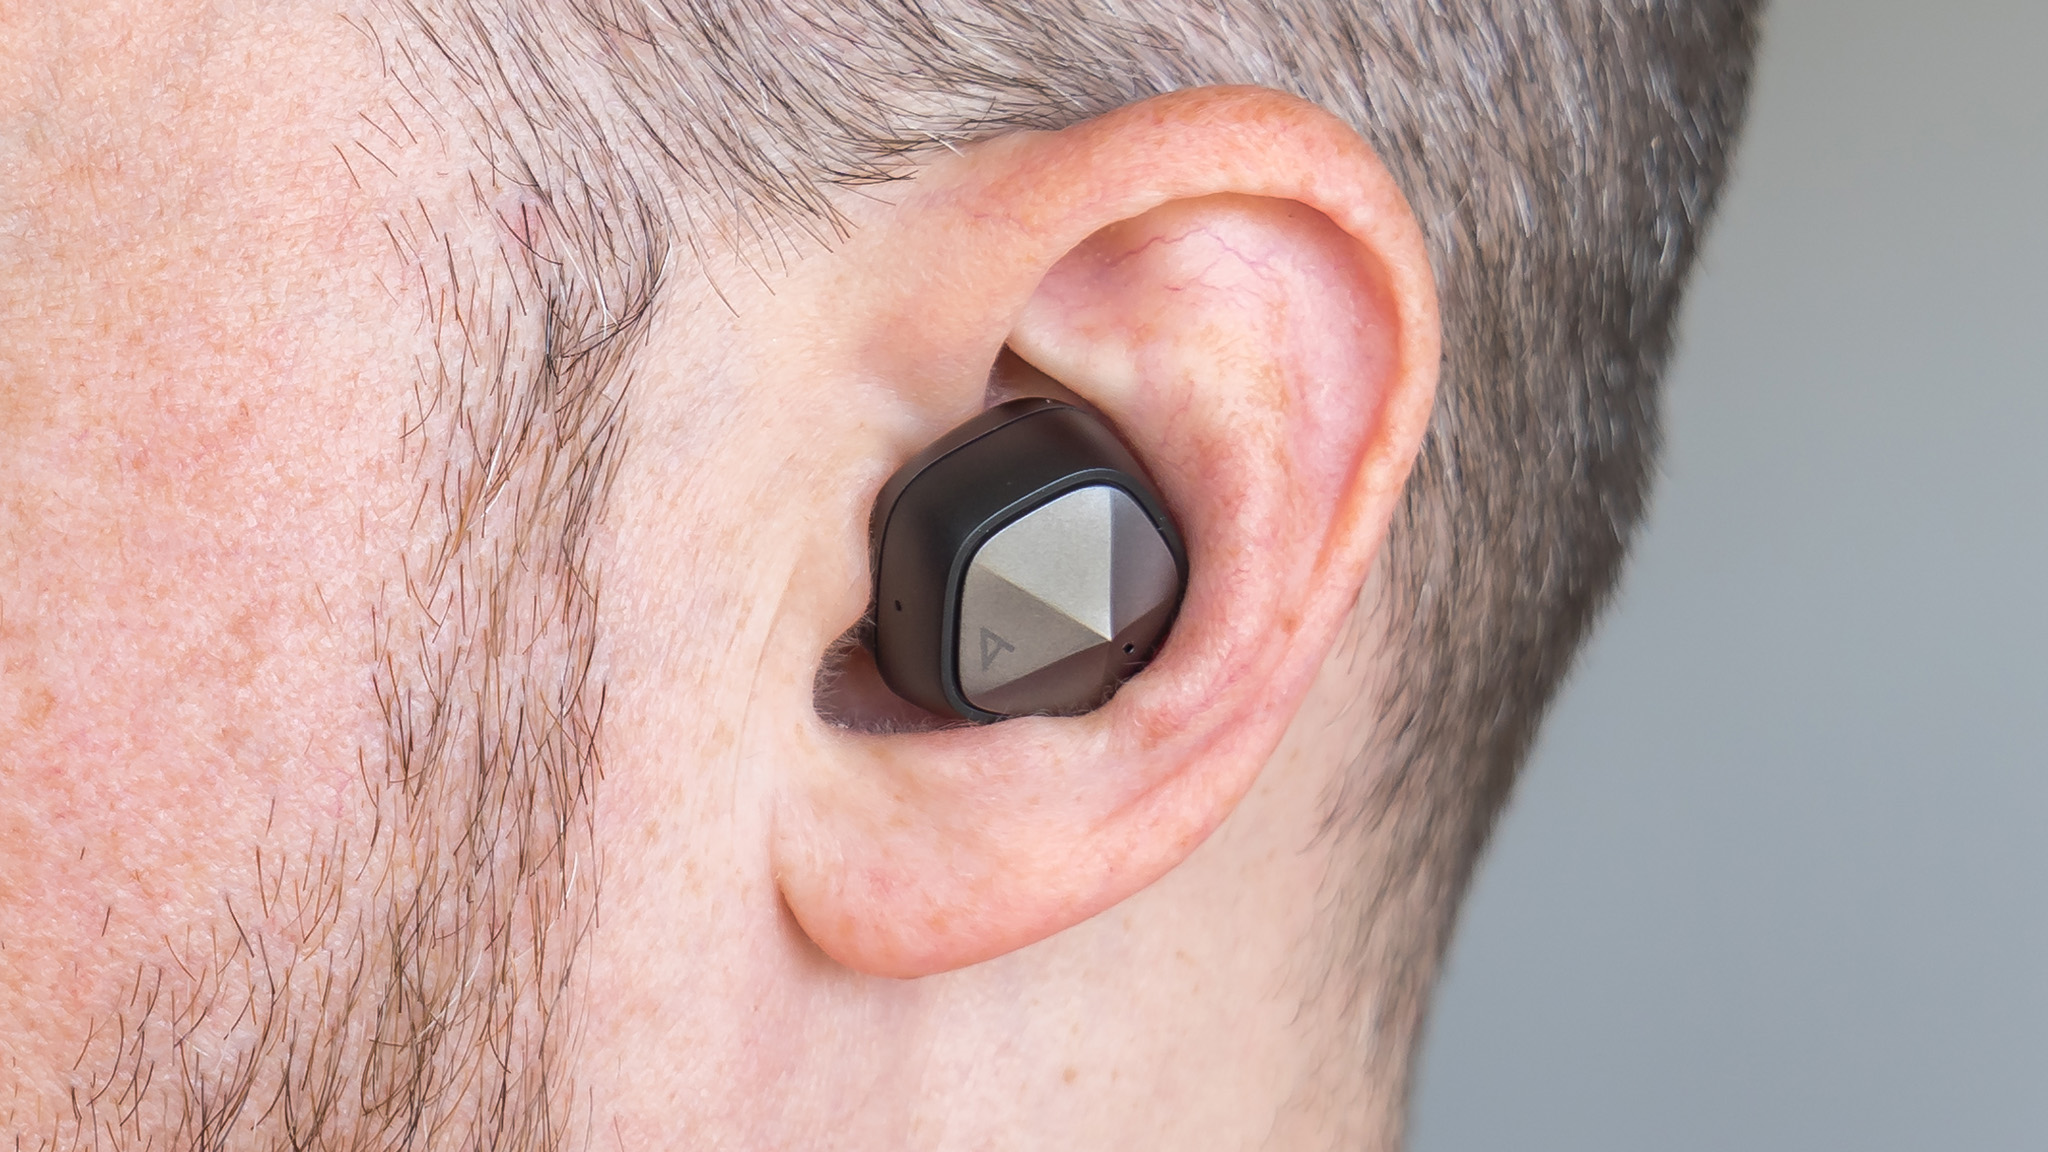 Close-up view of Astell & Kern UW100 in ear.